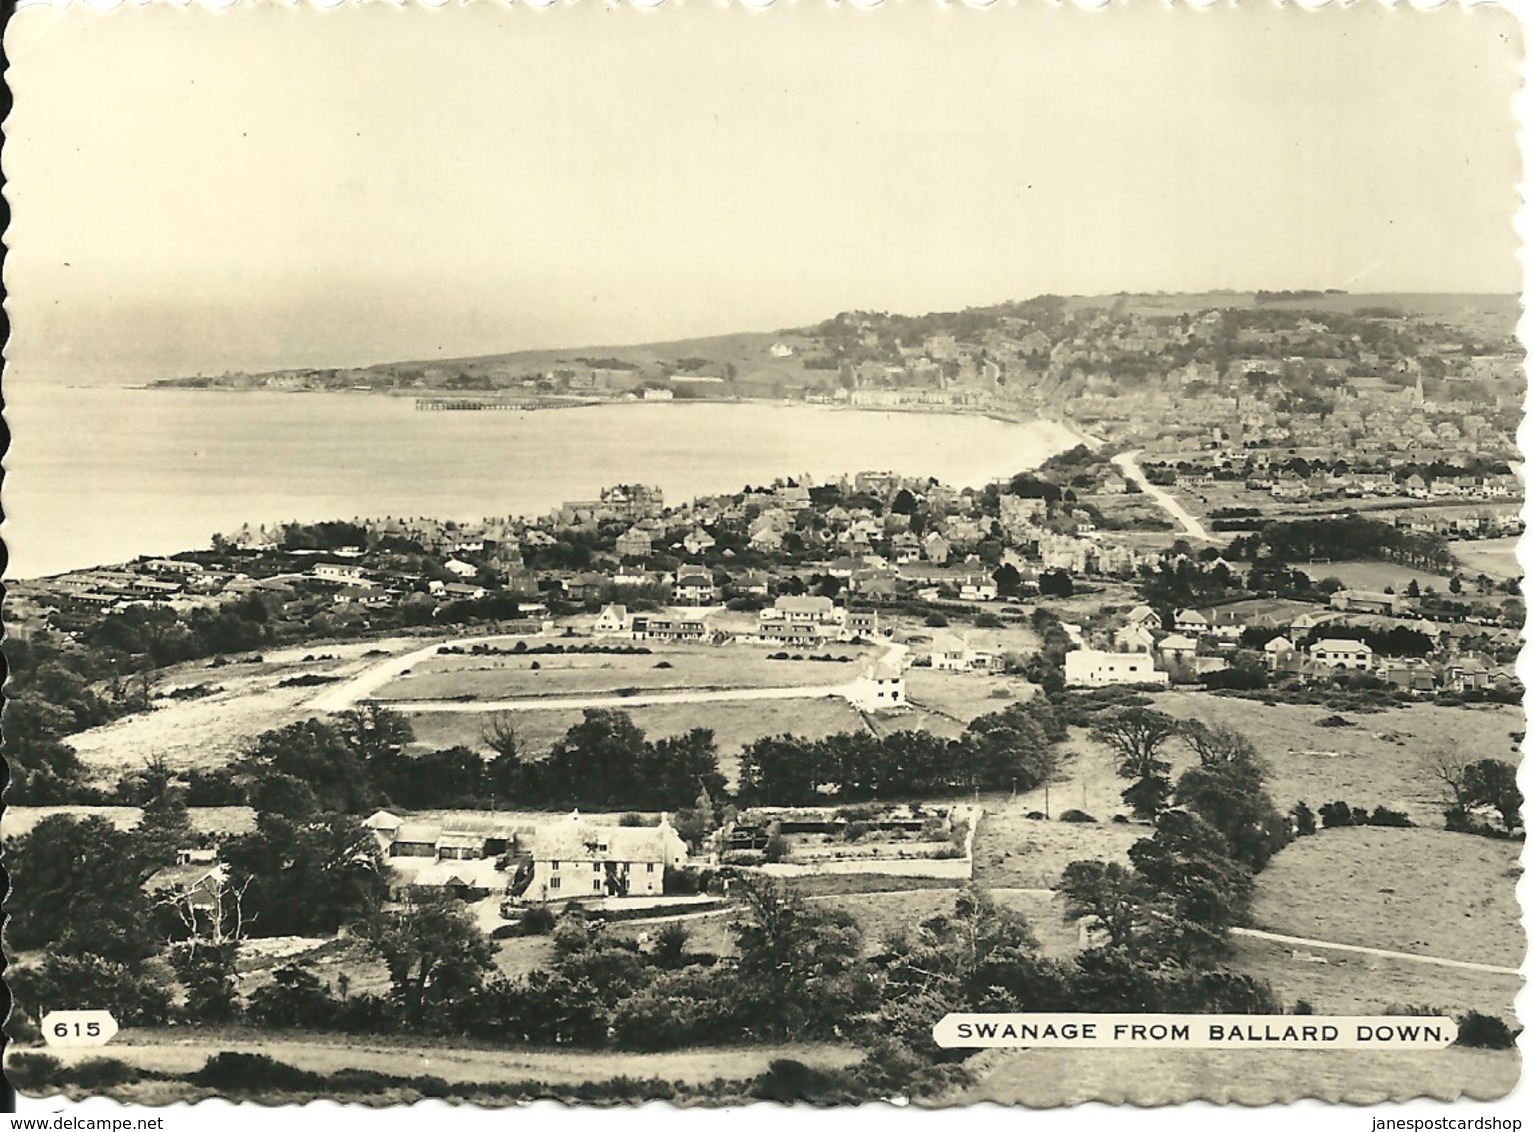 REAL PHOTOGRAPHIC POSTCARD - SWANAGE FROM BALLARD DOWN - POSTALLY USED 1950's - Swanage